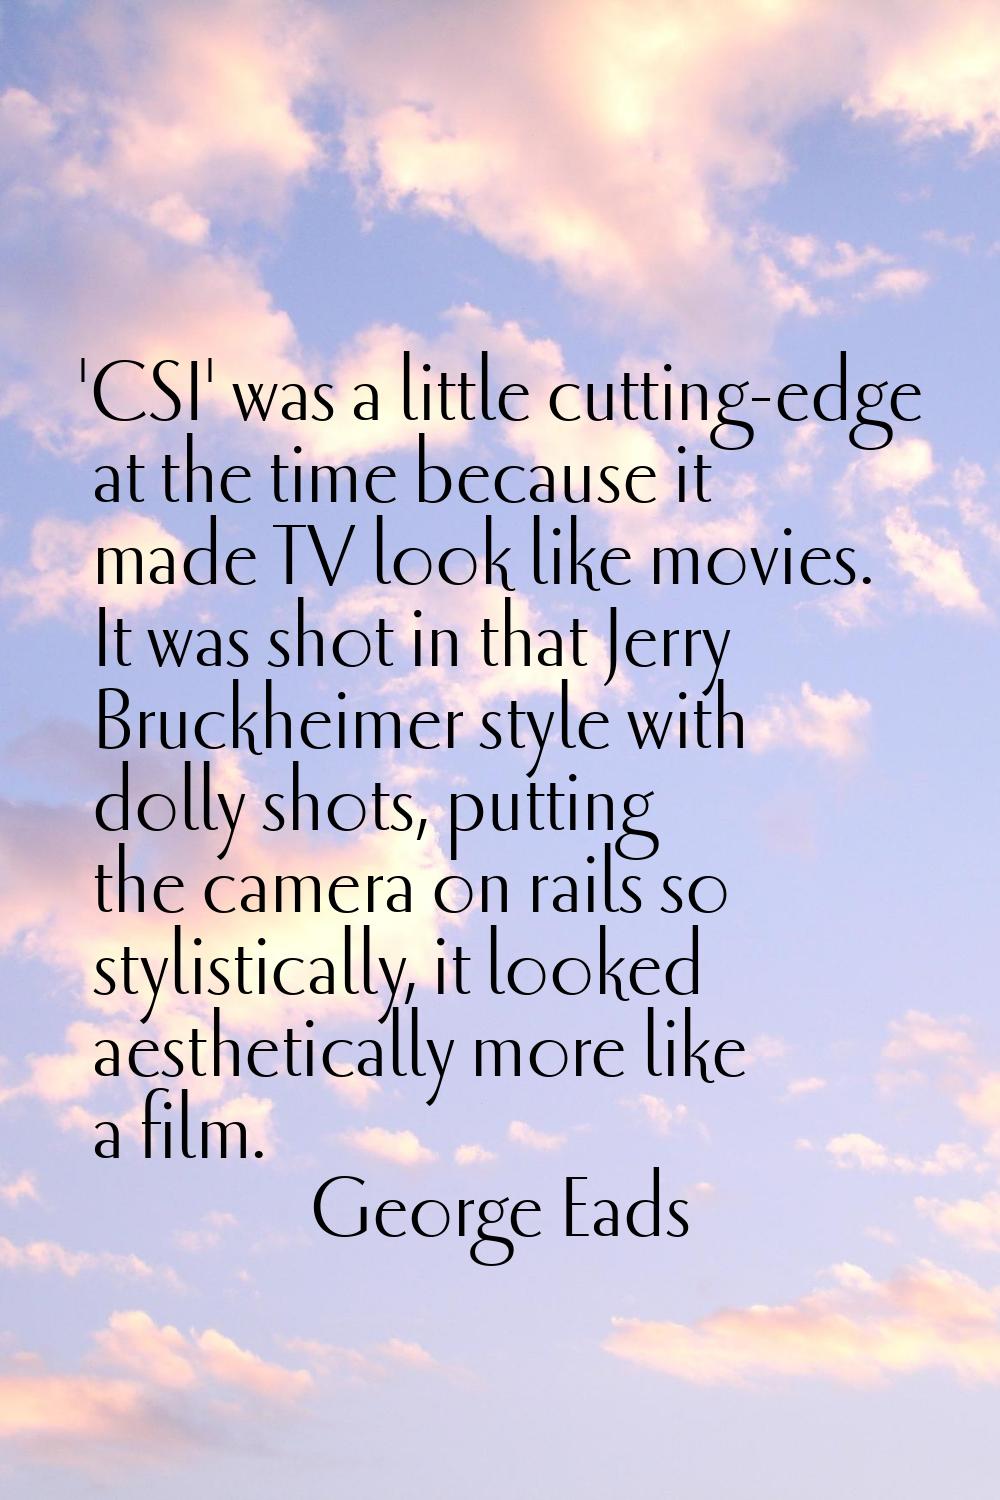 'CSI' was a little cutting-edge at the time because it made TV look like movies. It was shot in tha